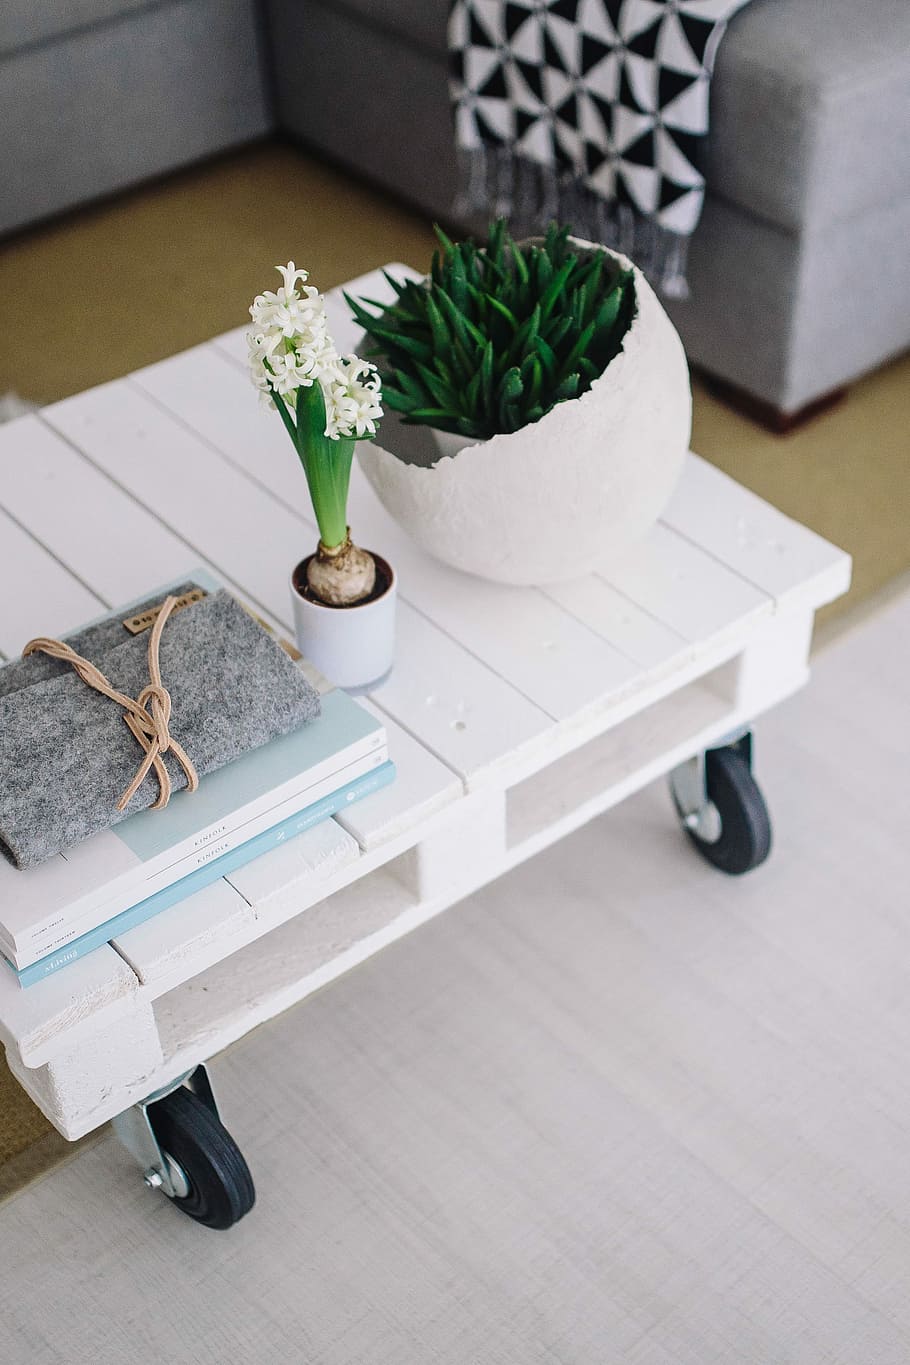 Small wooden table with a potted plant and a grey wallet, magazines